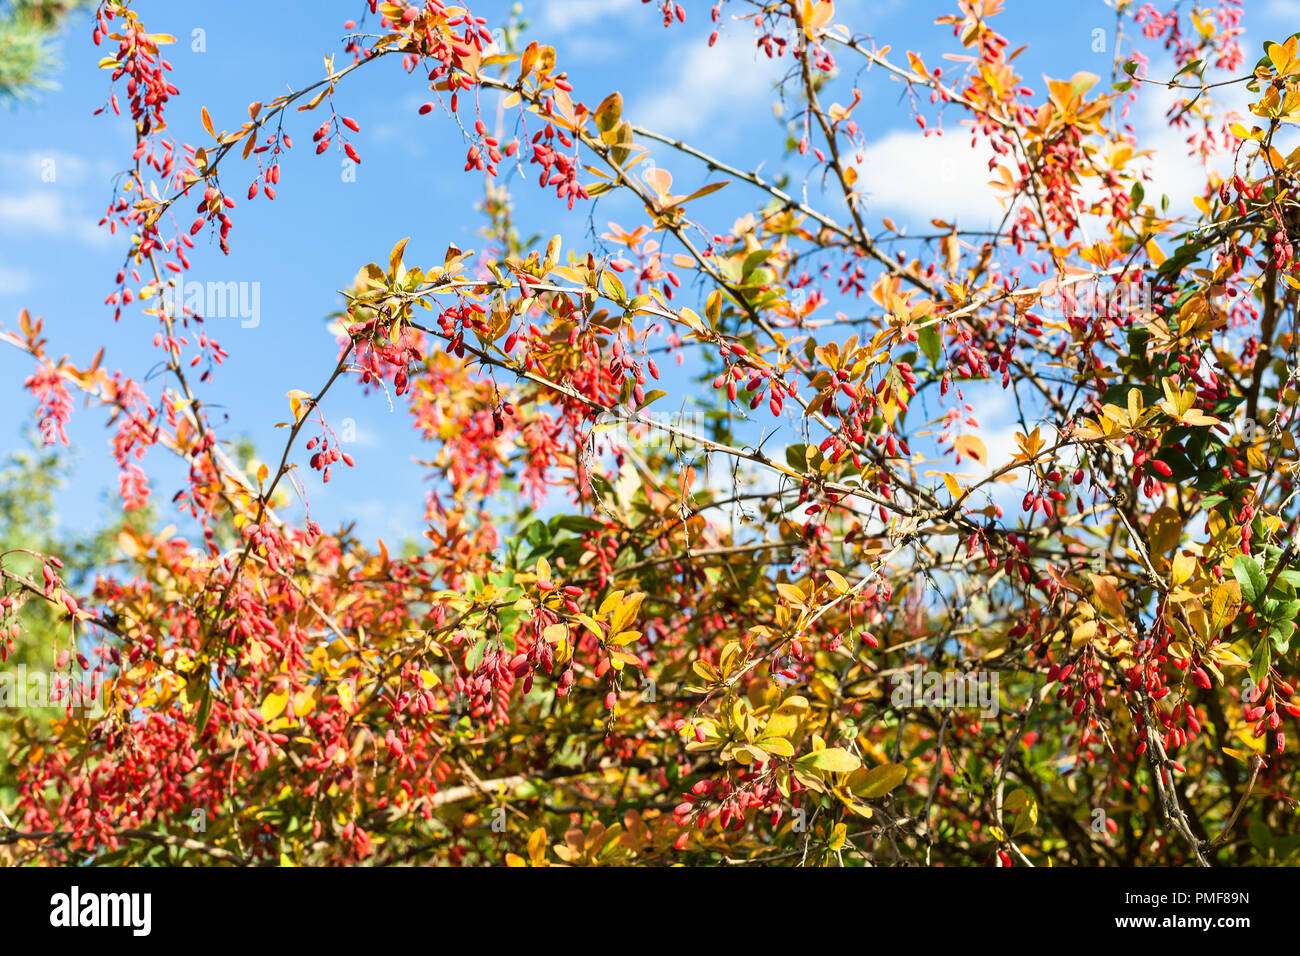 colorful barberry shrub with ripe fruits in sunny autumn day Stock Photo